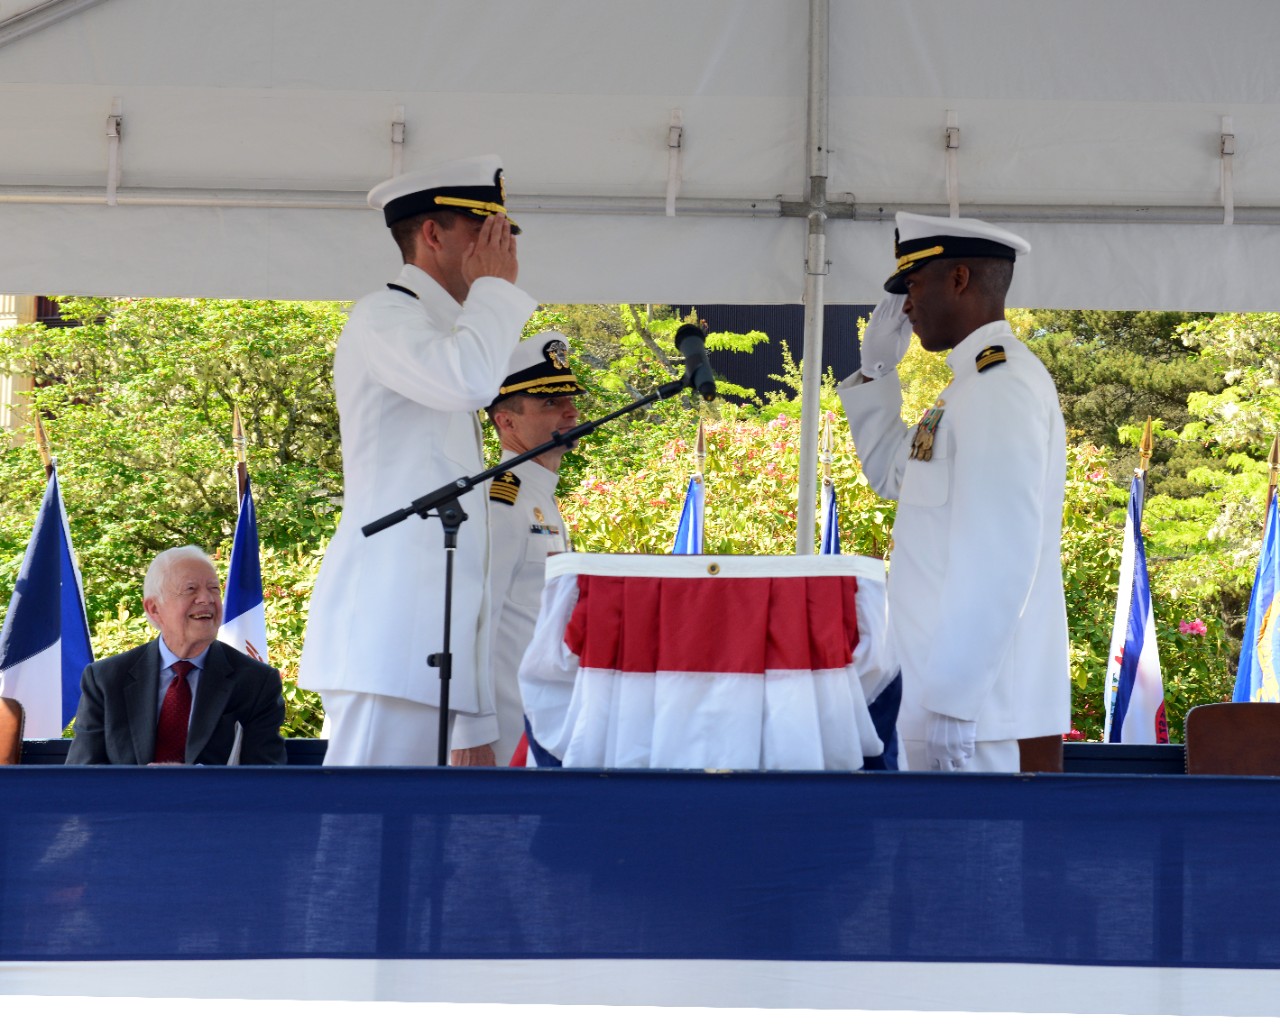 Two men in Navy uniforms salute each other while President Carter looks on from his seat.